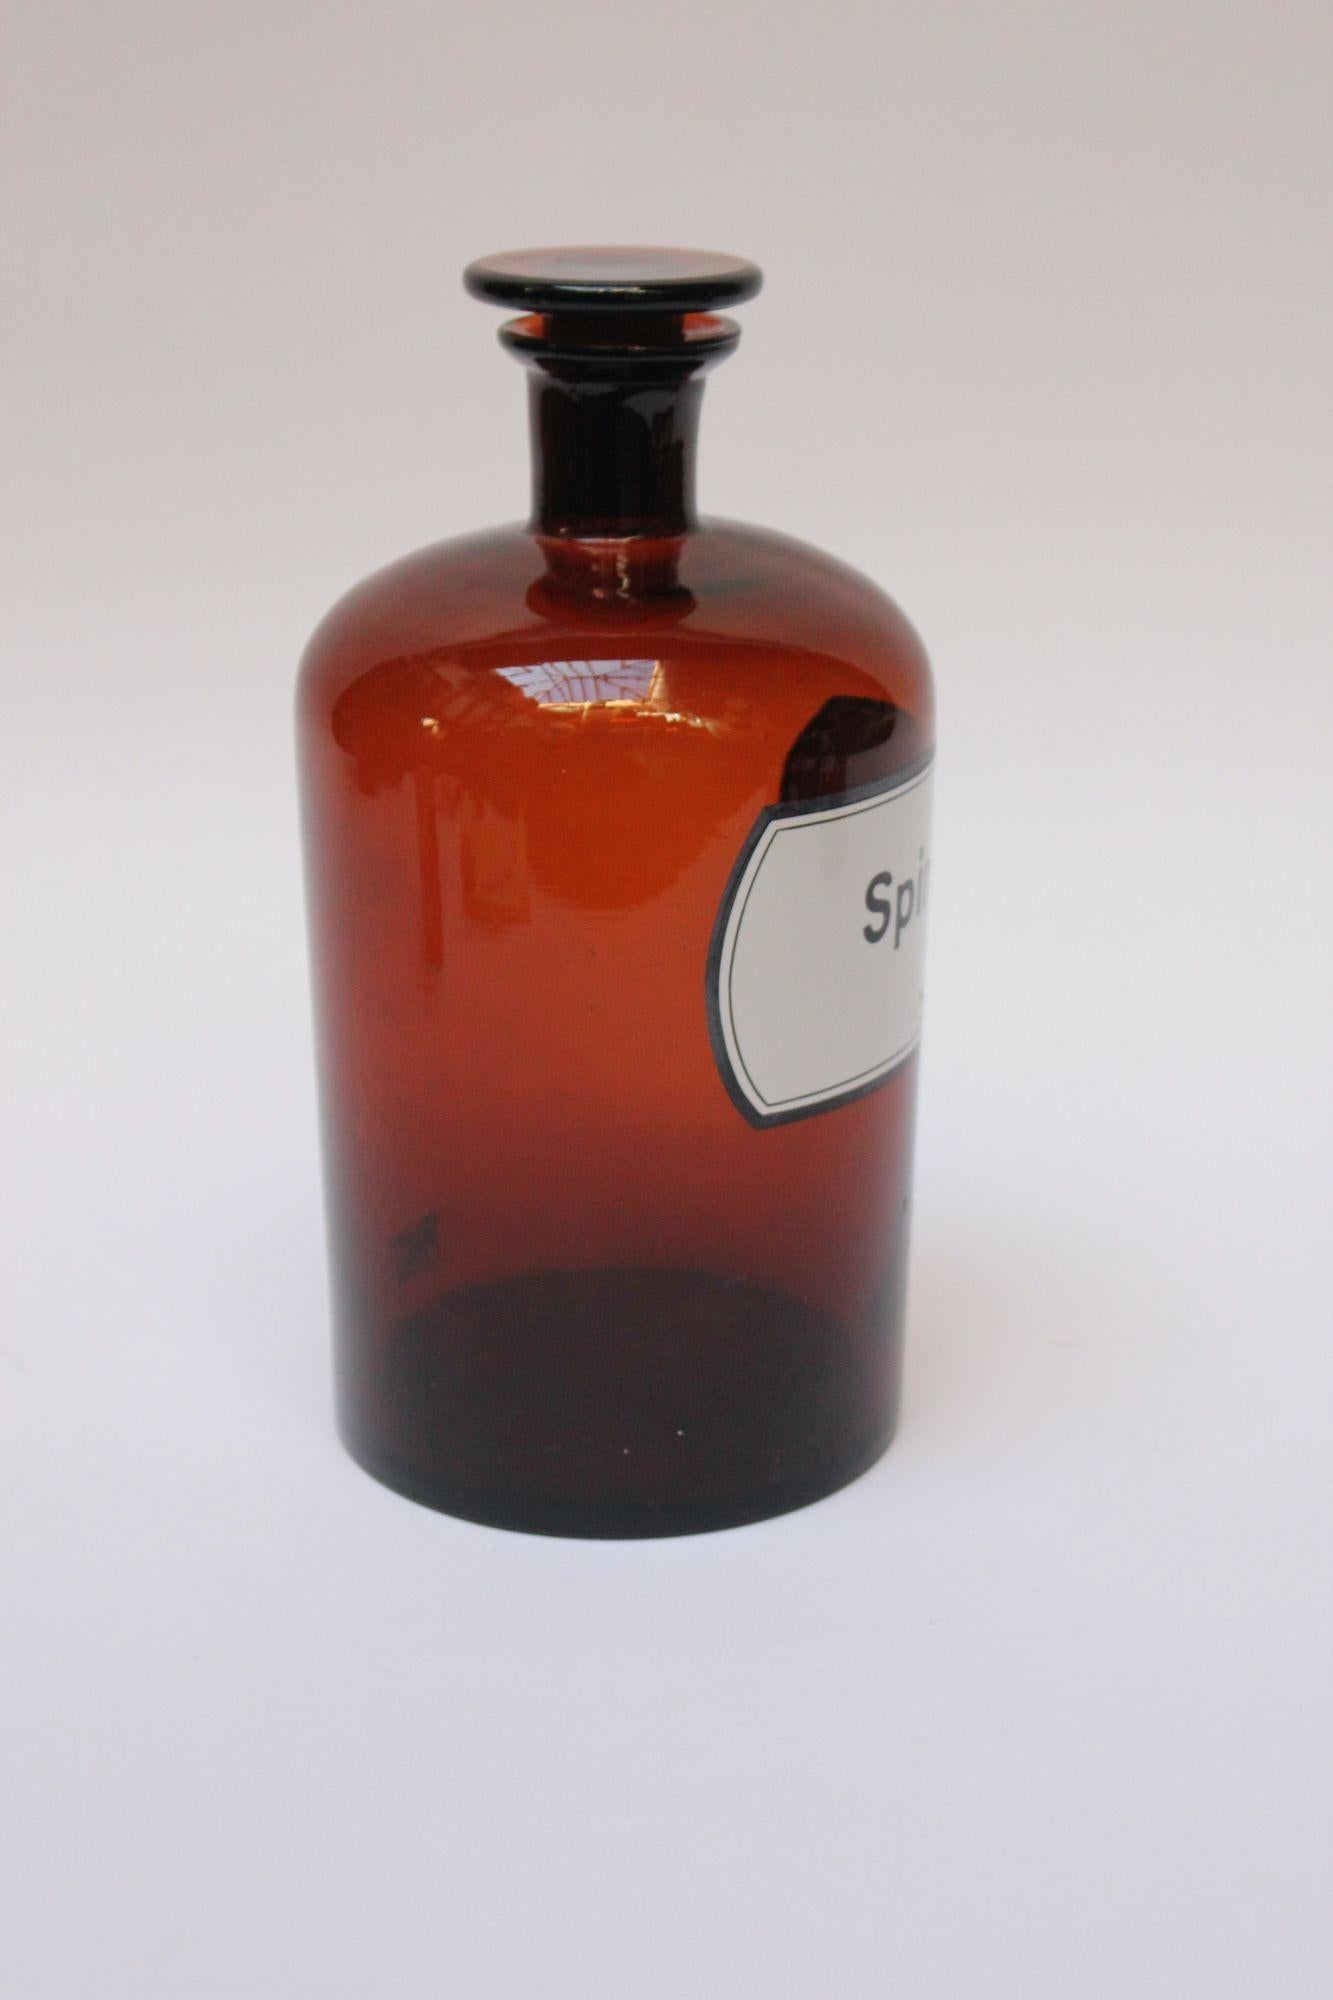 Large 'Spiritus' pharmacy bottle/apothecary jar (circa late 1920s/early 1930s, Germany).
Amber glass with button stopper and enamel label.
Good, vintage condition with light wear to the label and minor soiling to the bottle's interior. There are